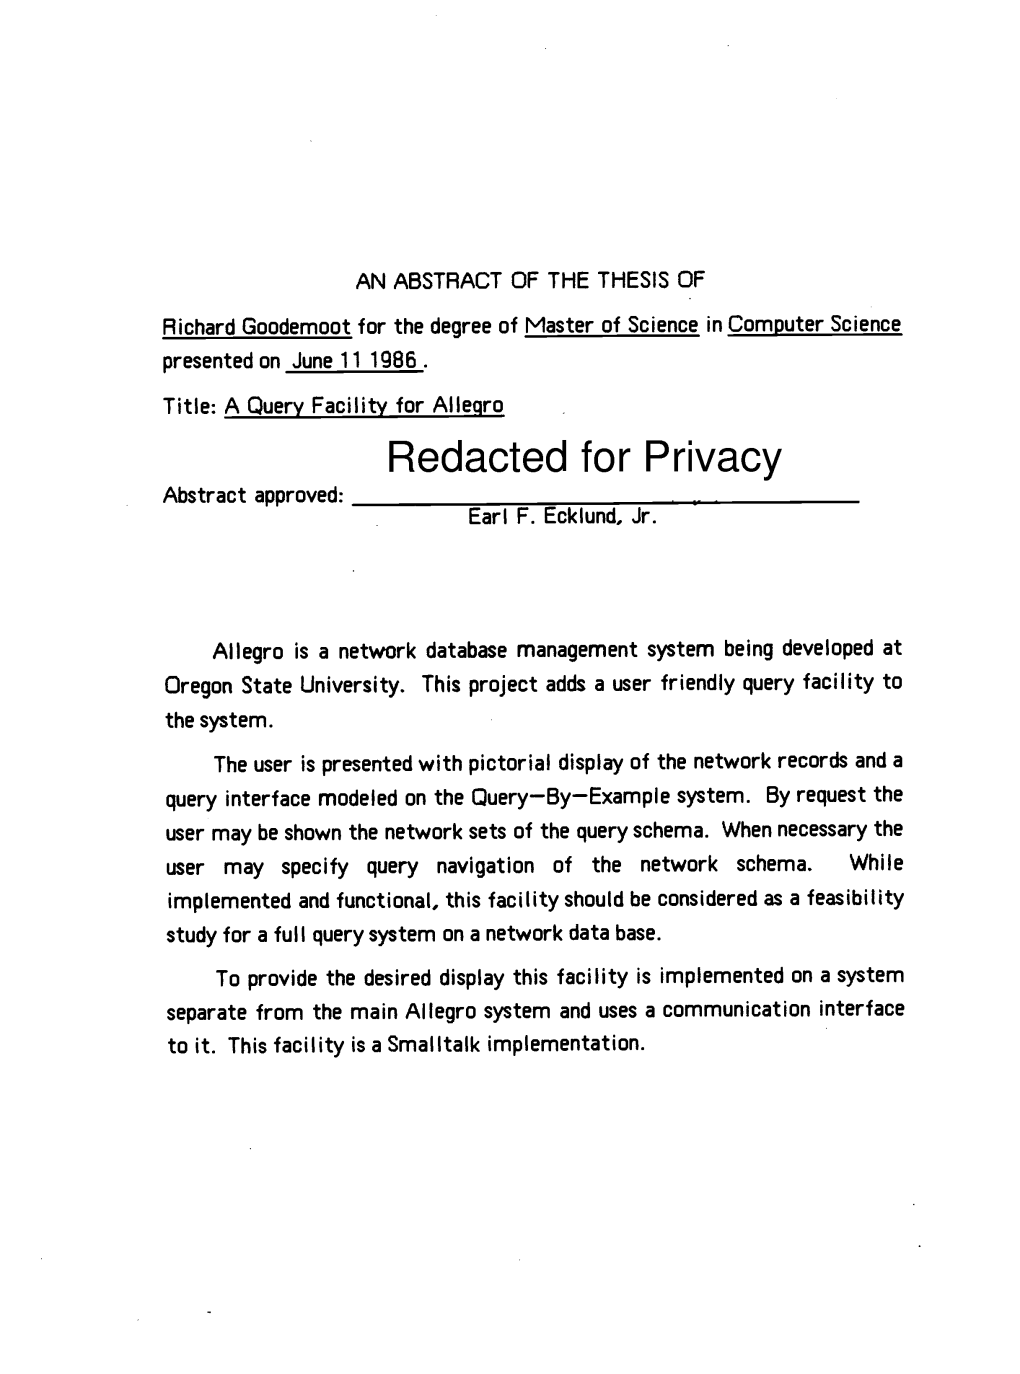 A Query Facility for Allegro Redacted for Privacy Abstract Approved: Earl F